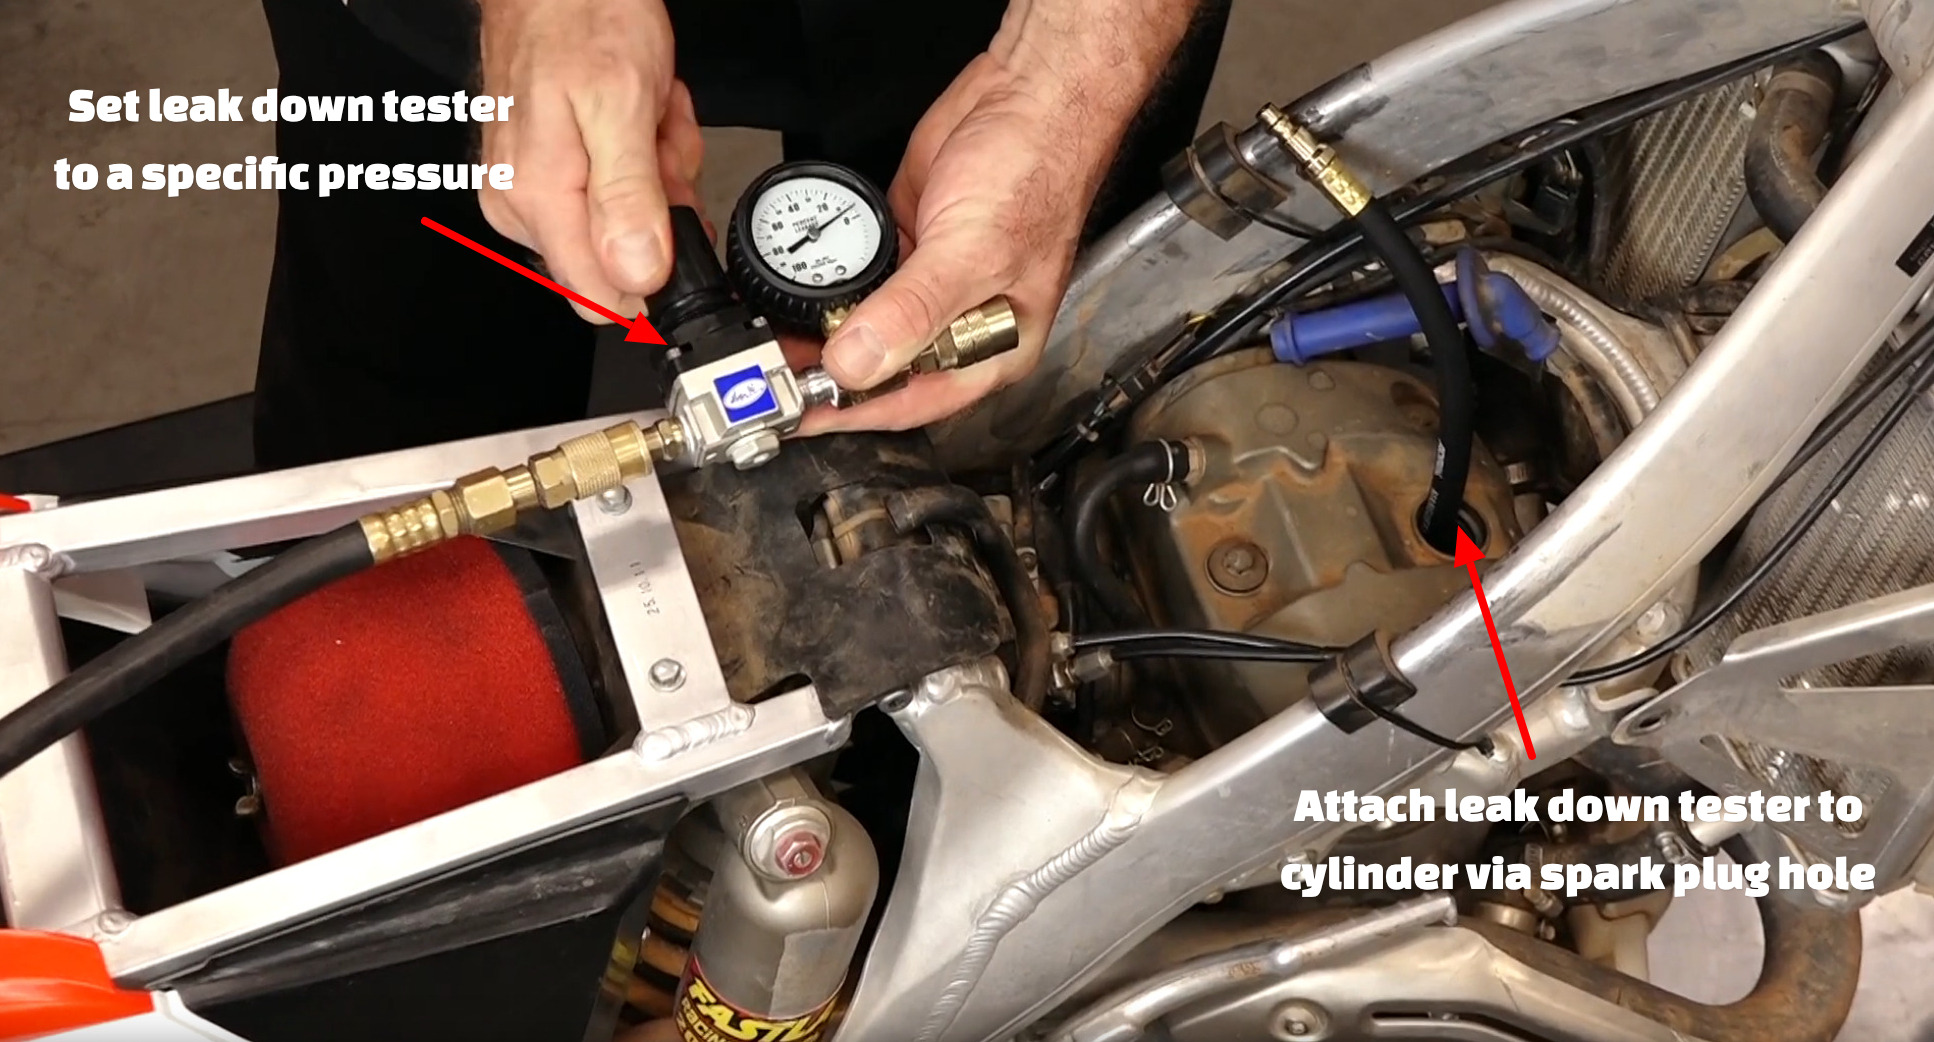 how to do a leakdown test on a motorcycle